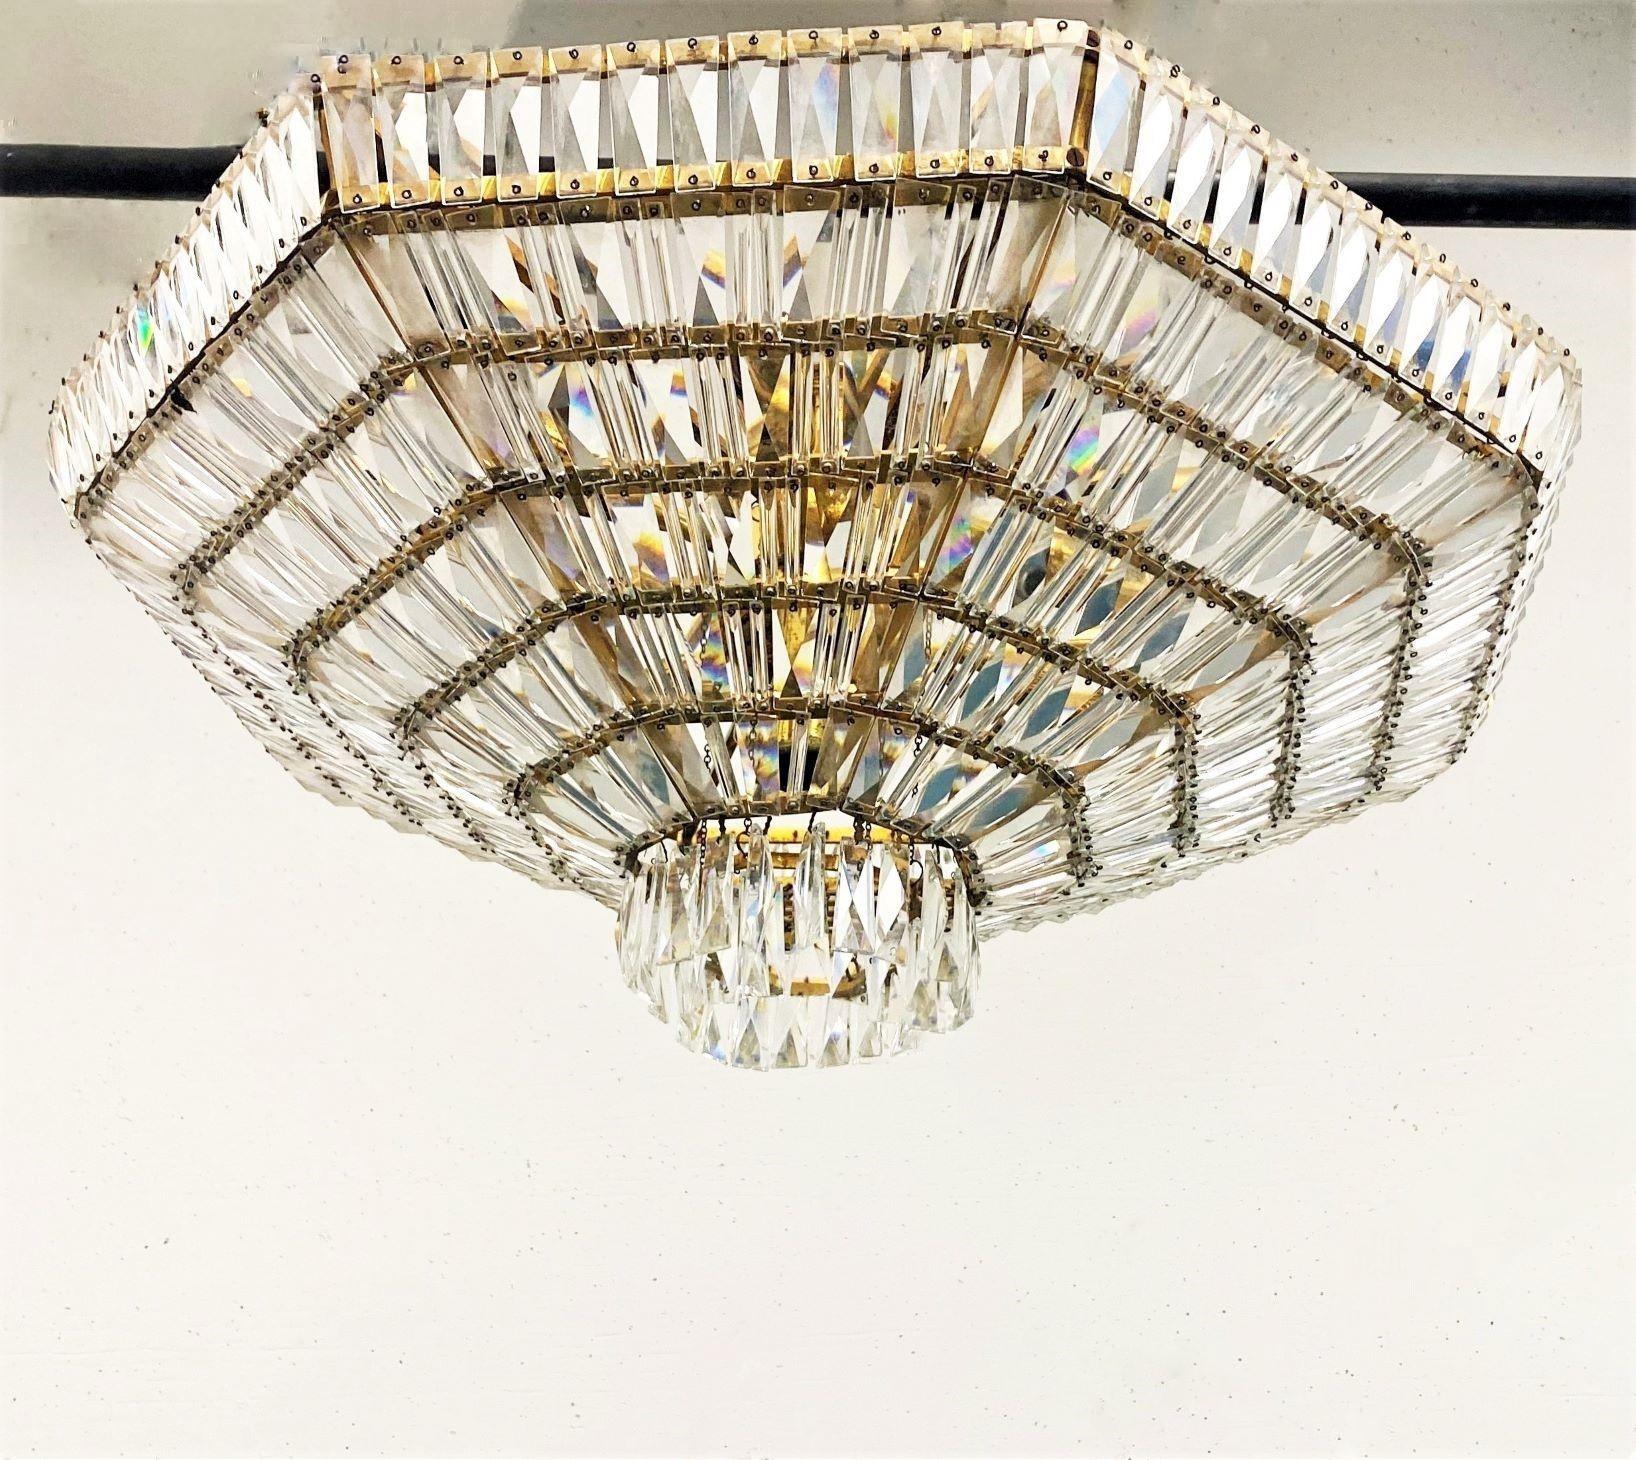 A large, glamorous Hollywood-Regency style nine-light flush mount or ceiling light, Austra, 1960s. Handcrafted of Swarovski crystals and brass forming a diamond shape, six fixed tiers with handcut faceted crystals and two hanging tiers on the